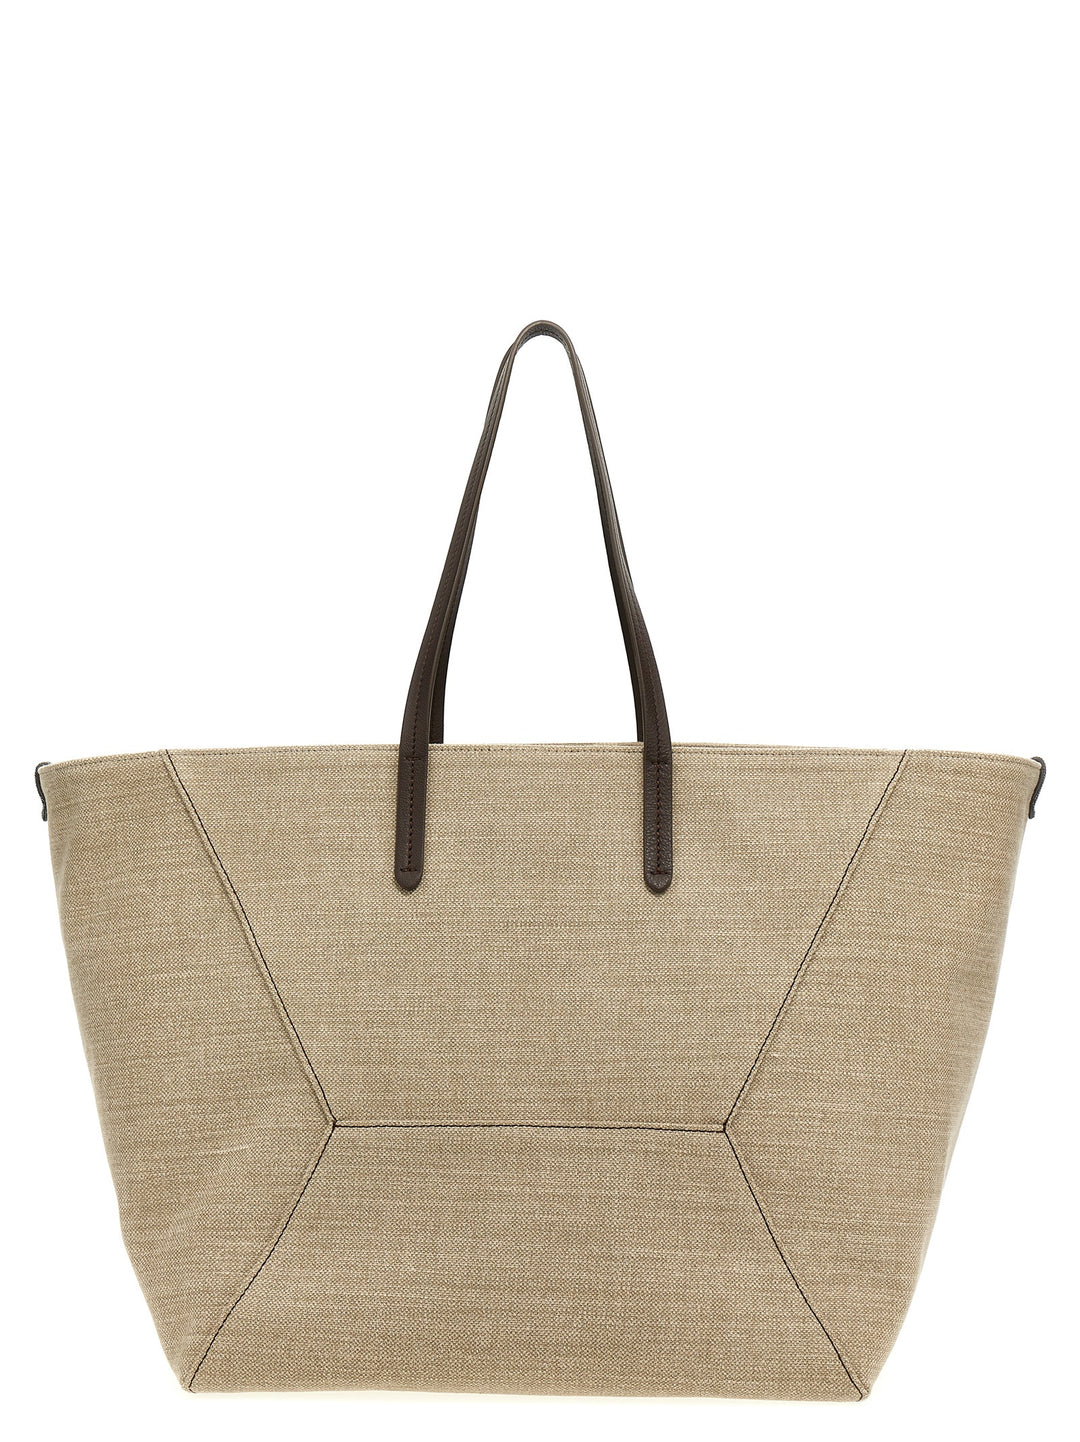 Large Canvas Shopping Bag Tote Beige